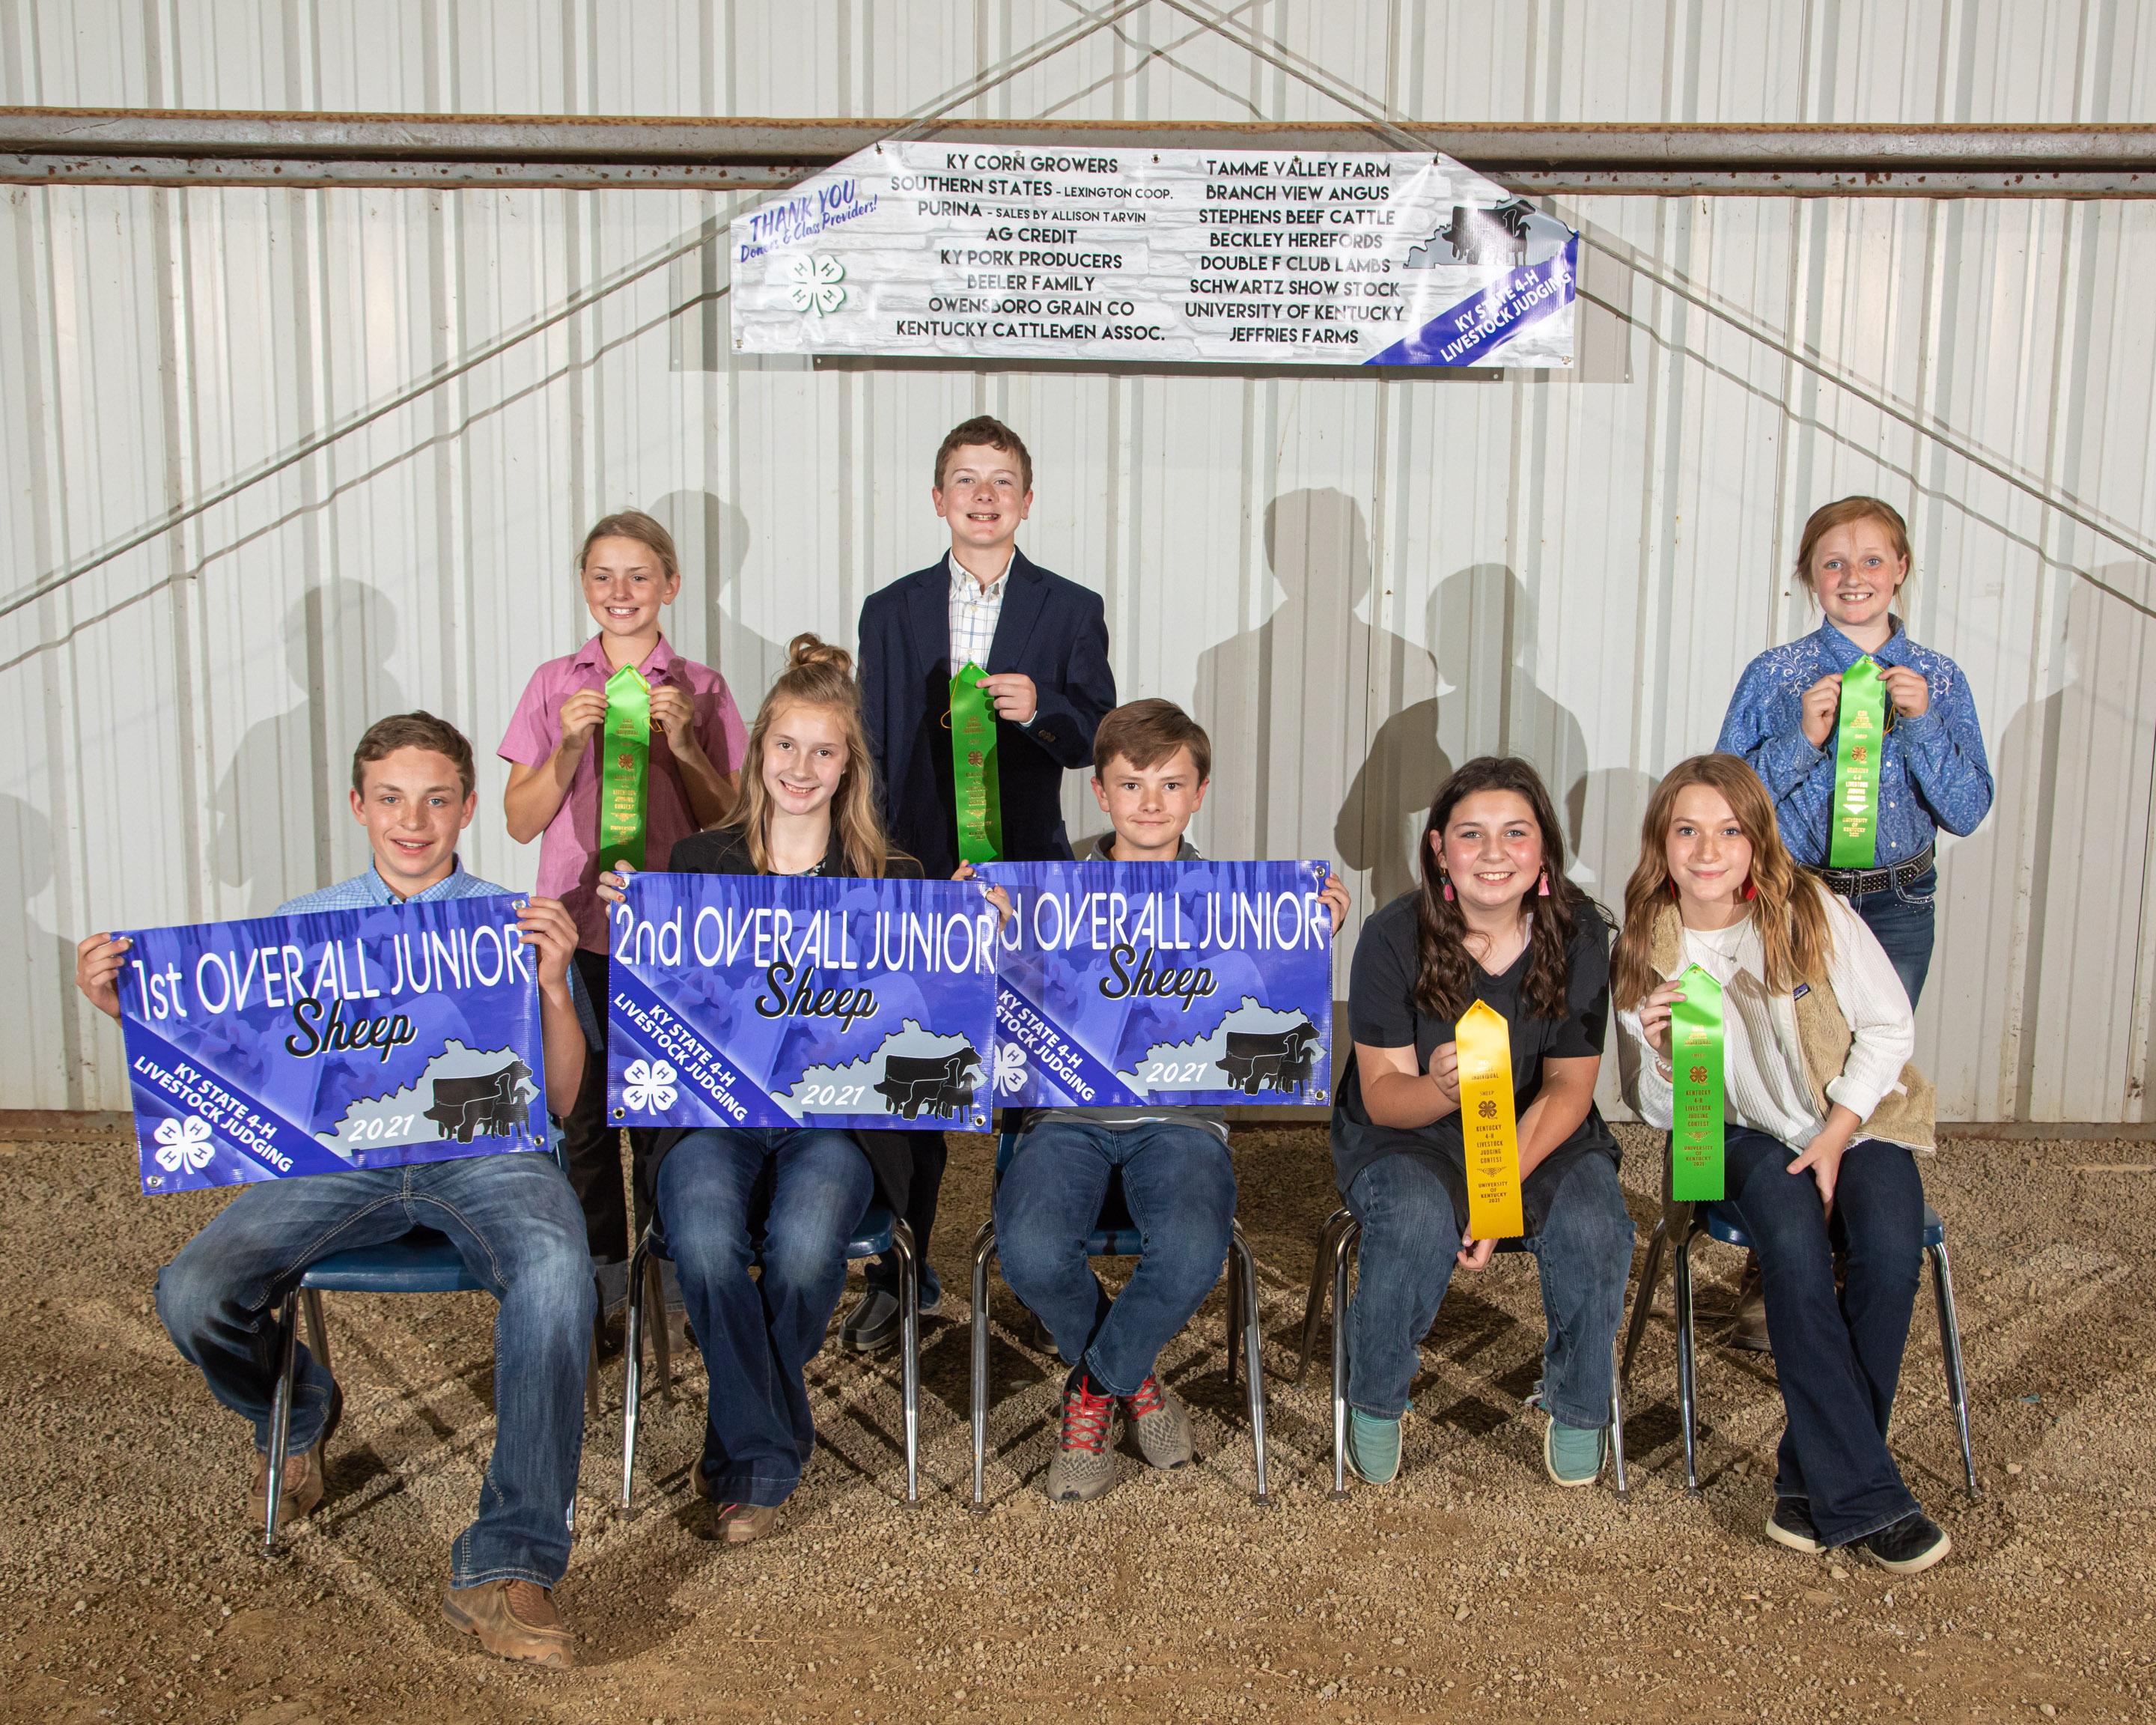 Top 10 Junior Individual Overall Sheep